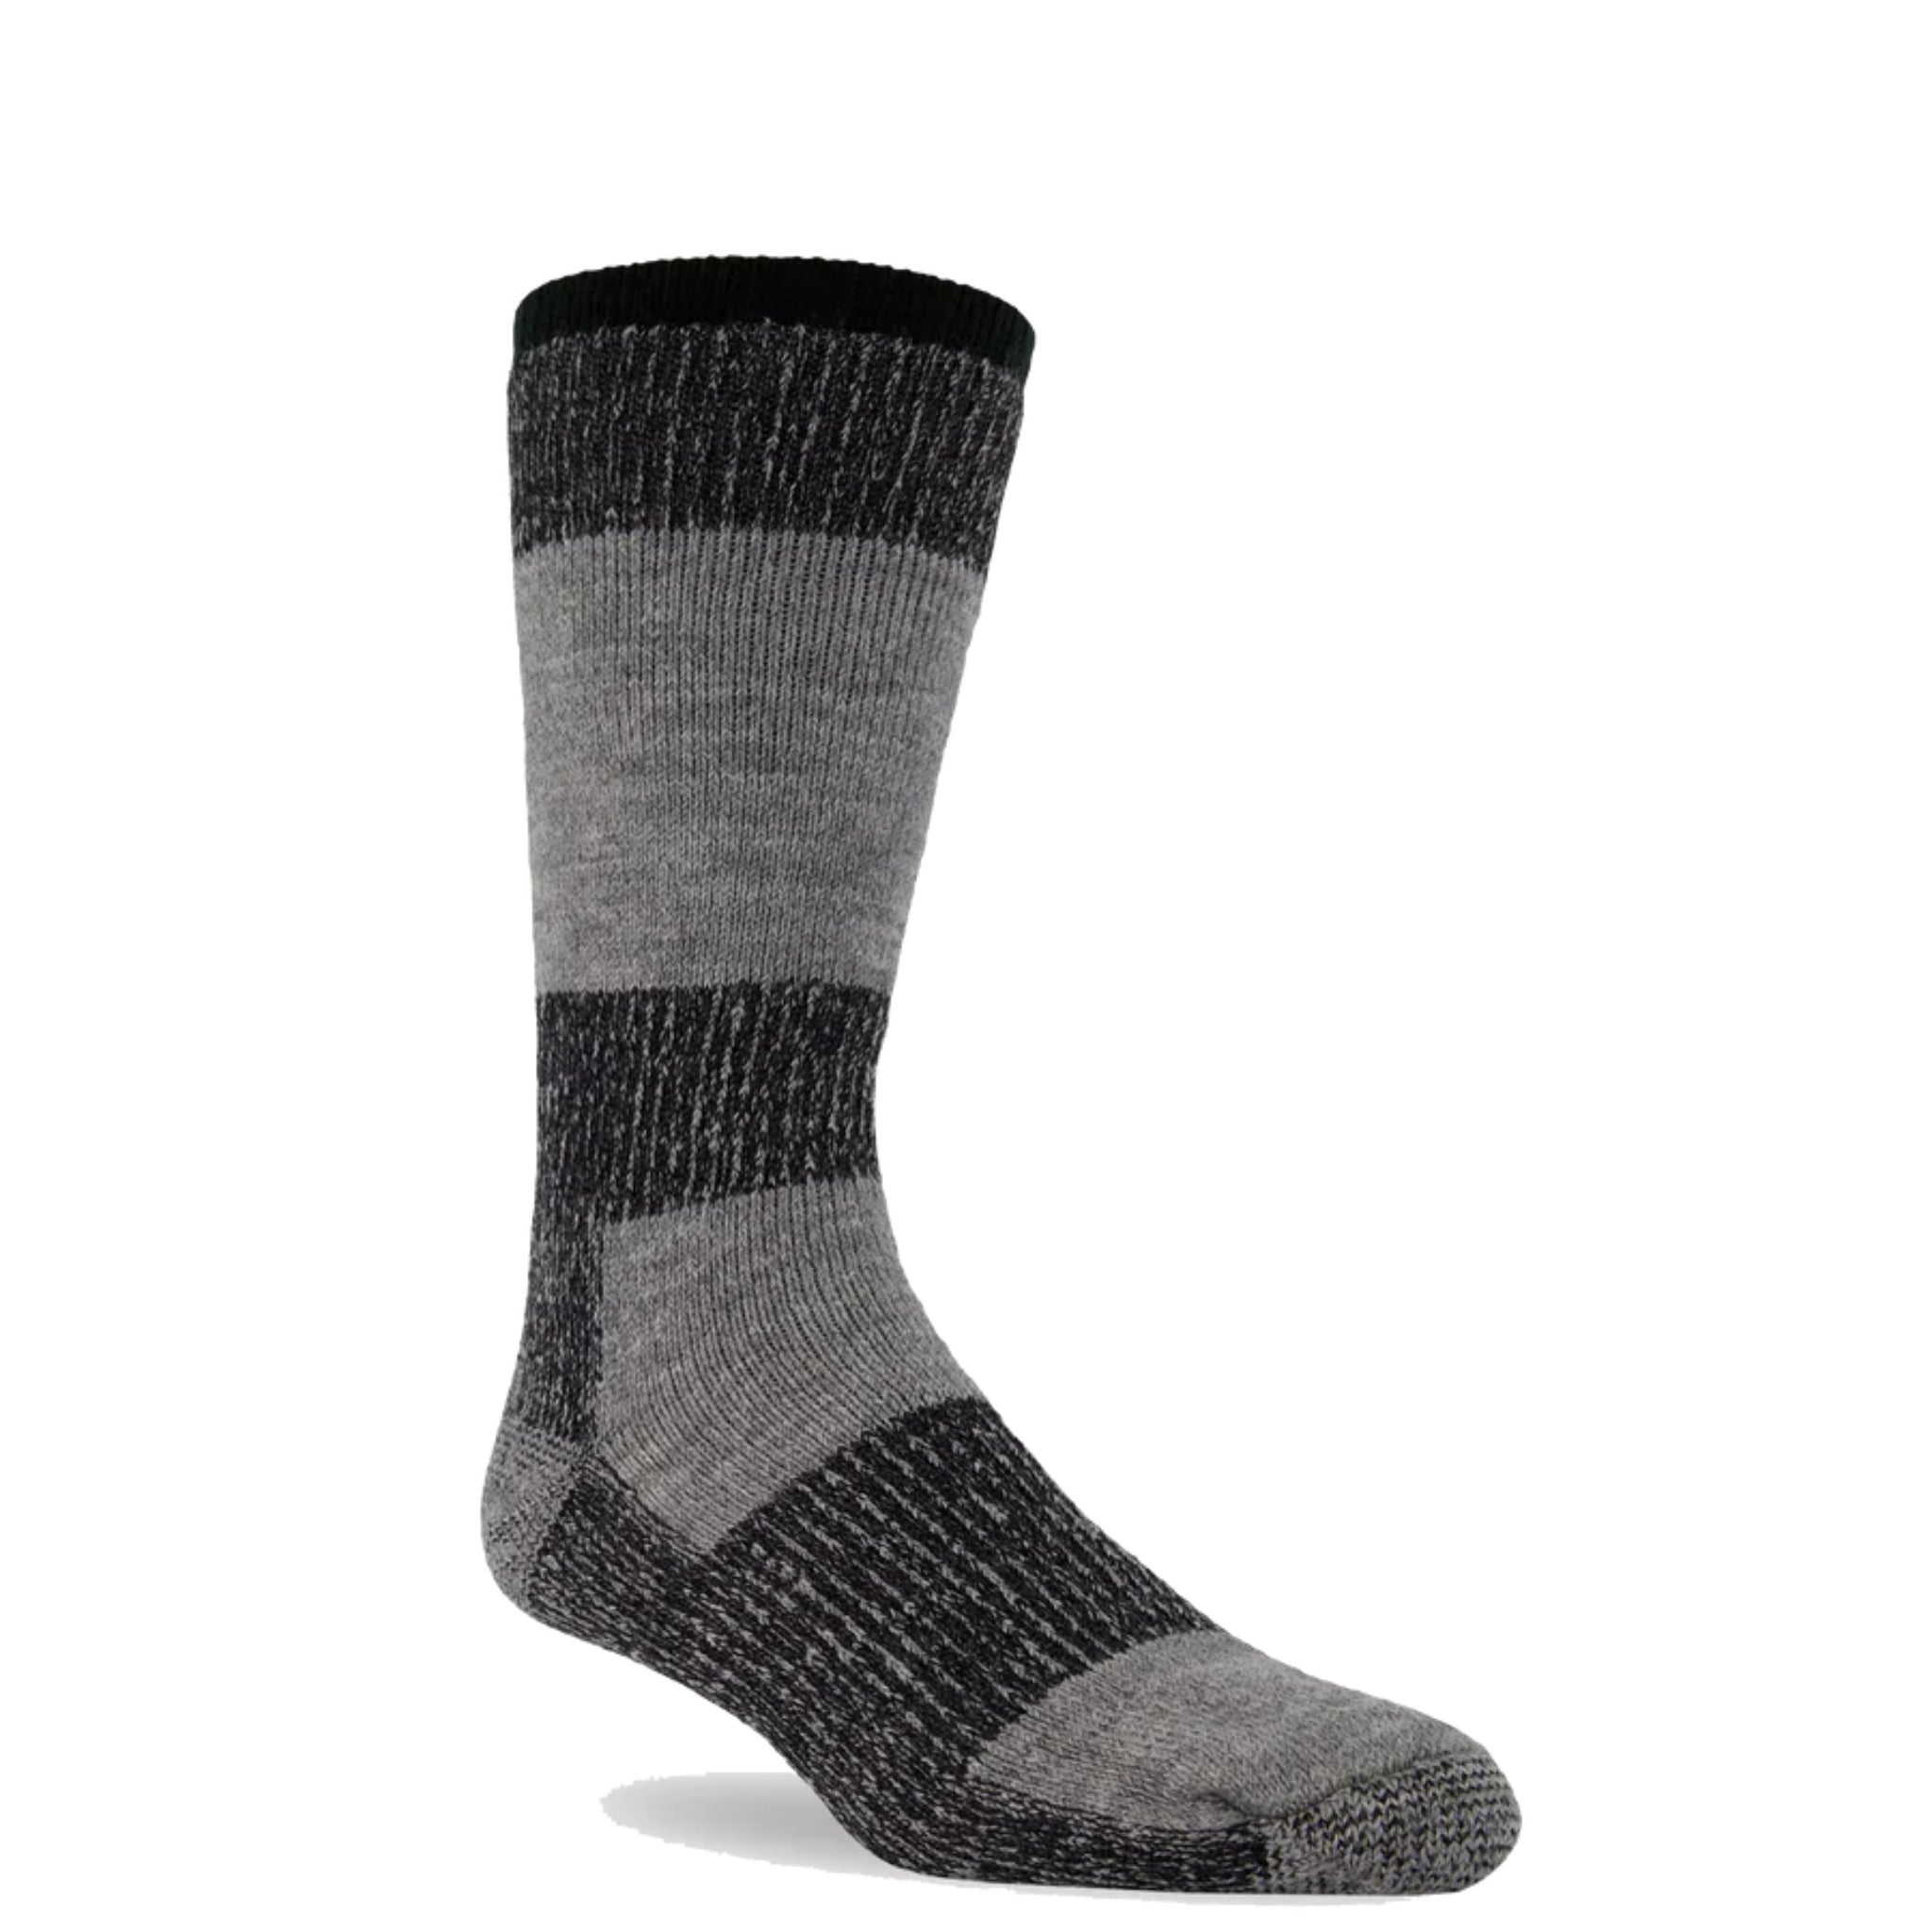 one grey heavyweight sock standing on its own on a white background